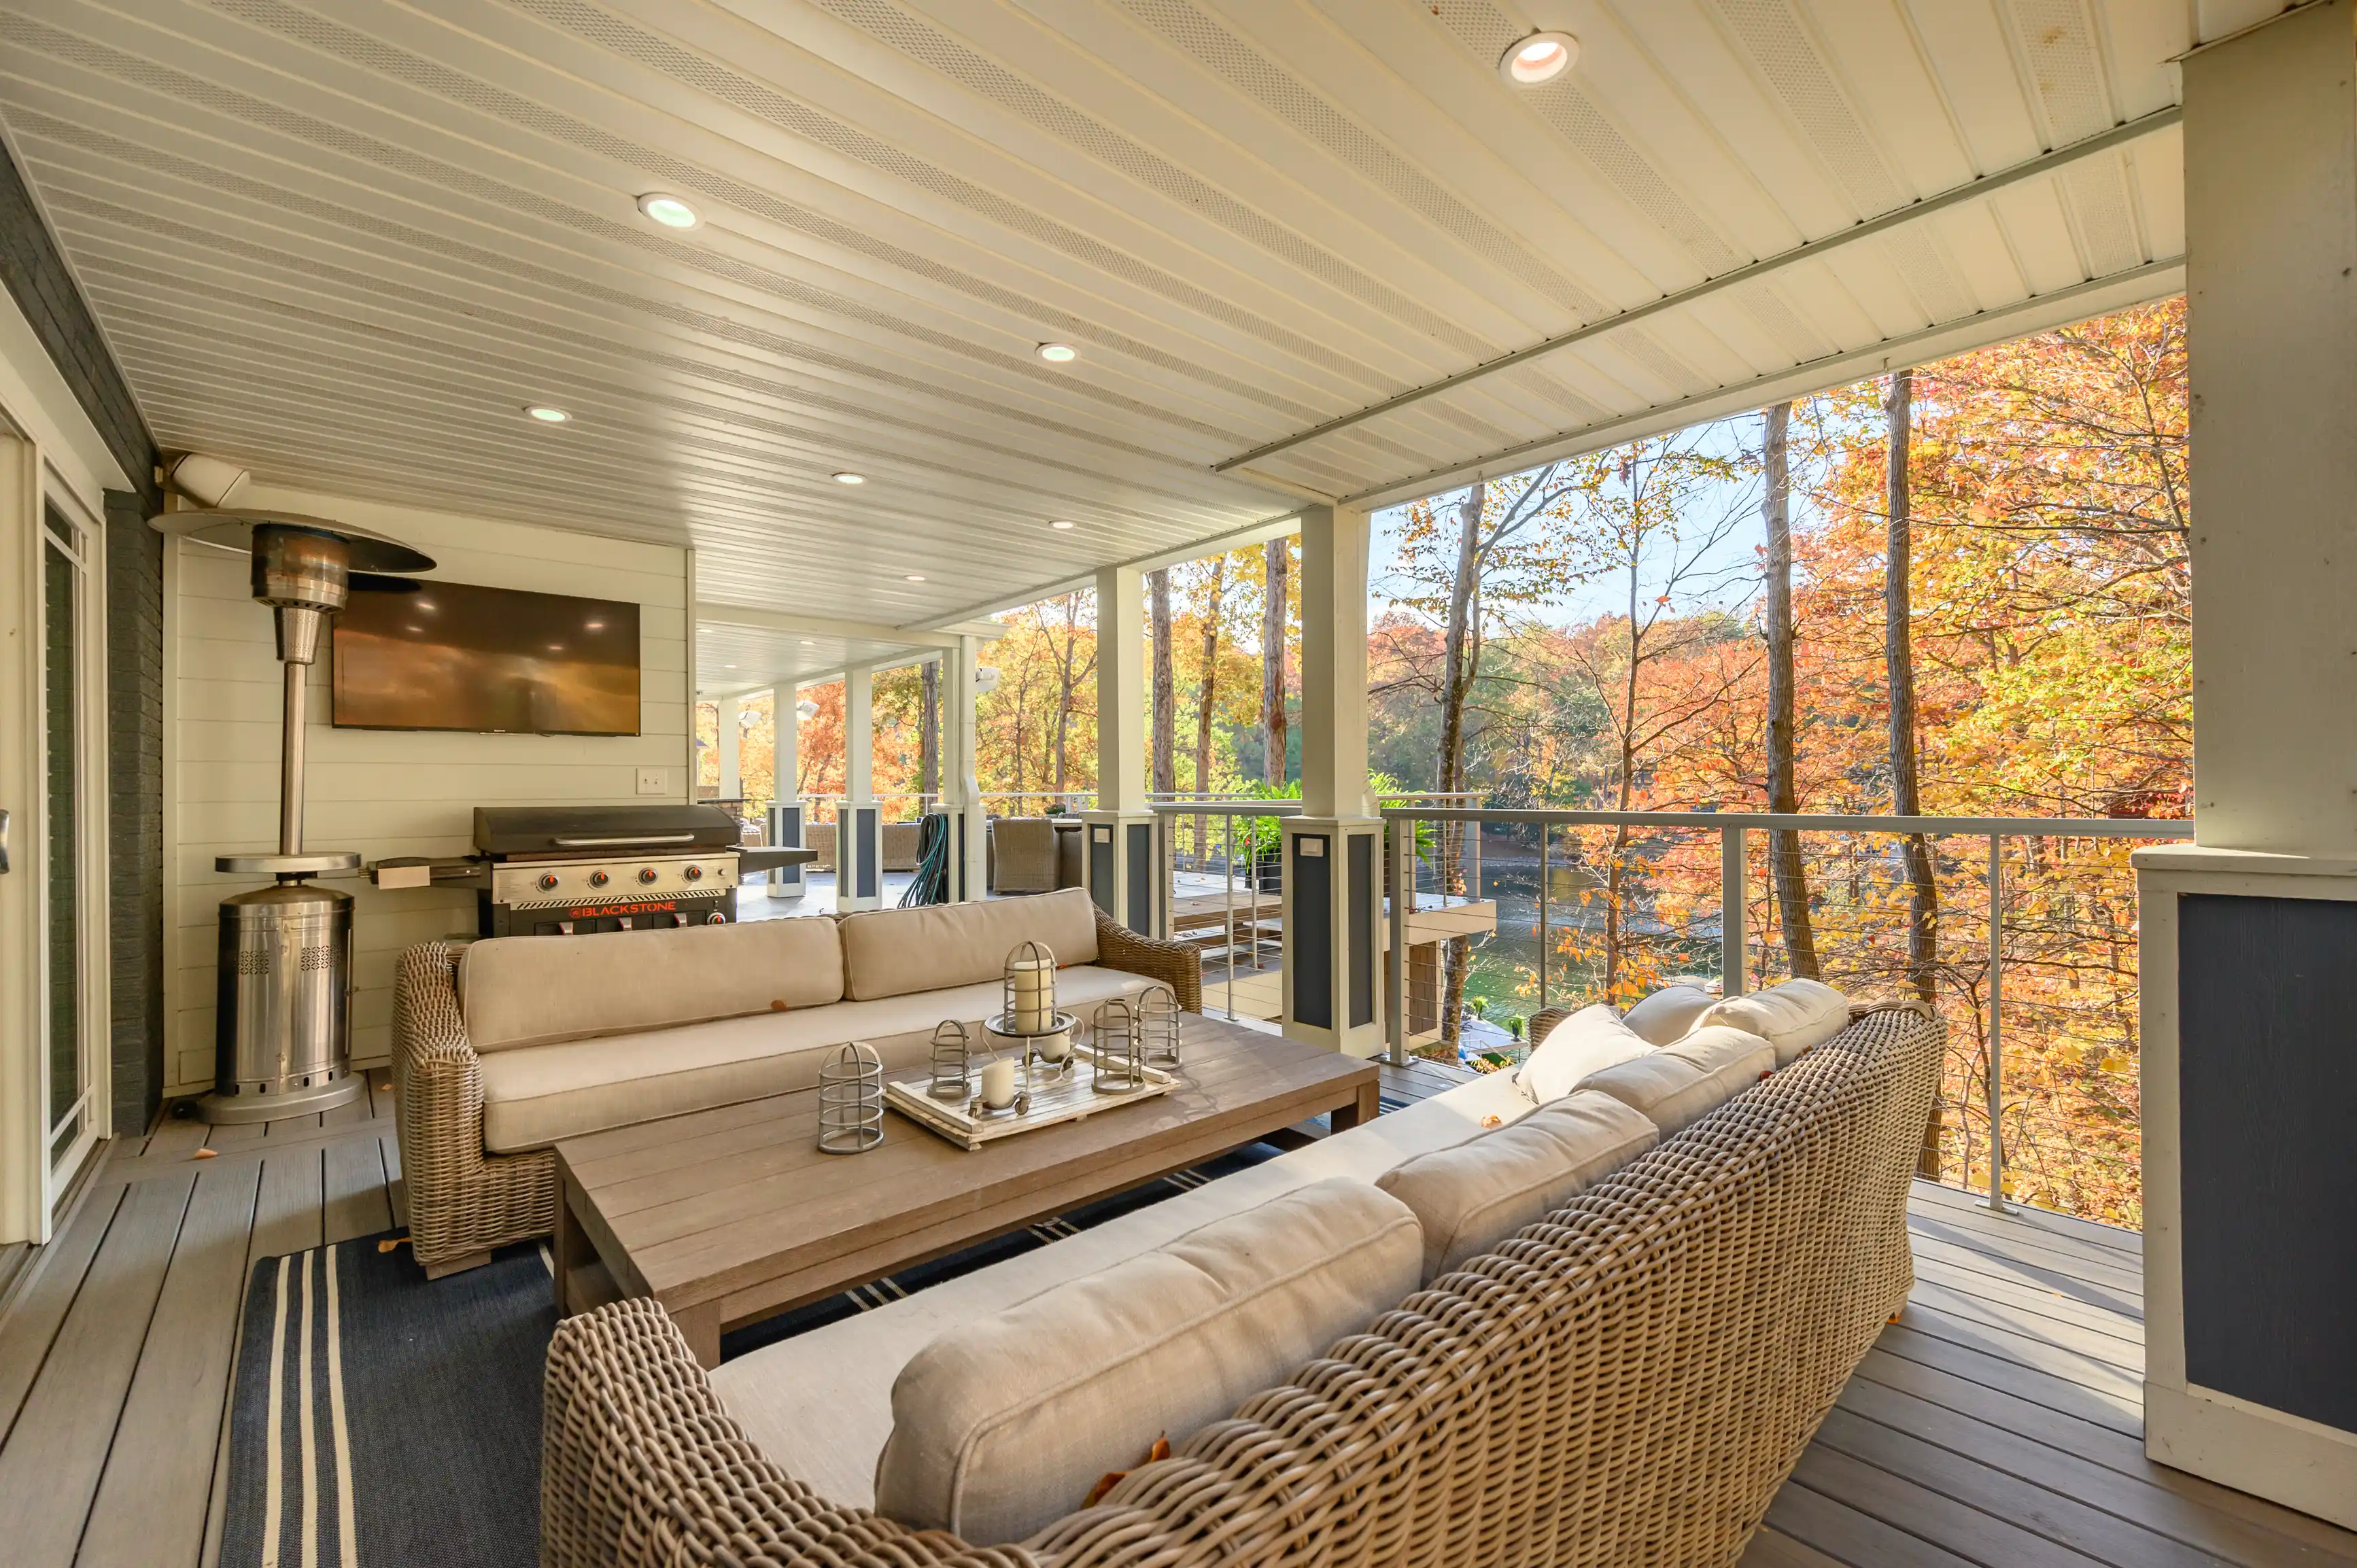 Spacious covered outdoor deck with comfortable seating, a grill, and a picturesque view of autumn trees.